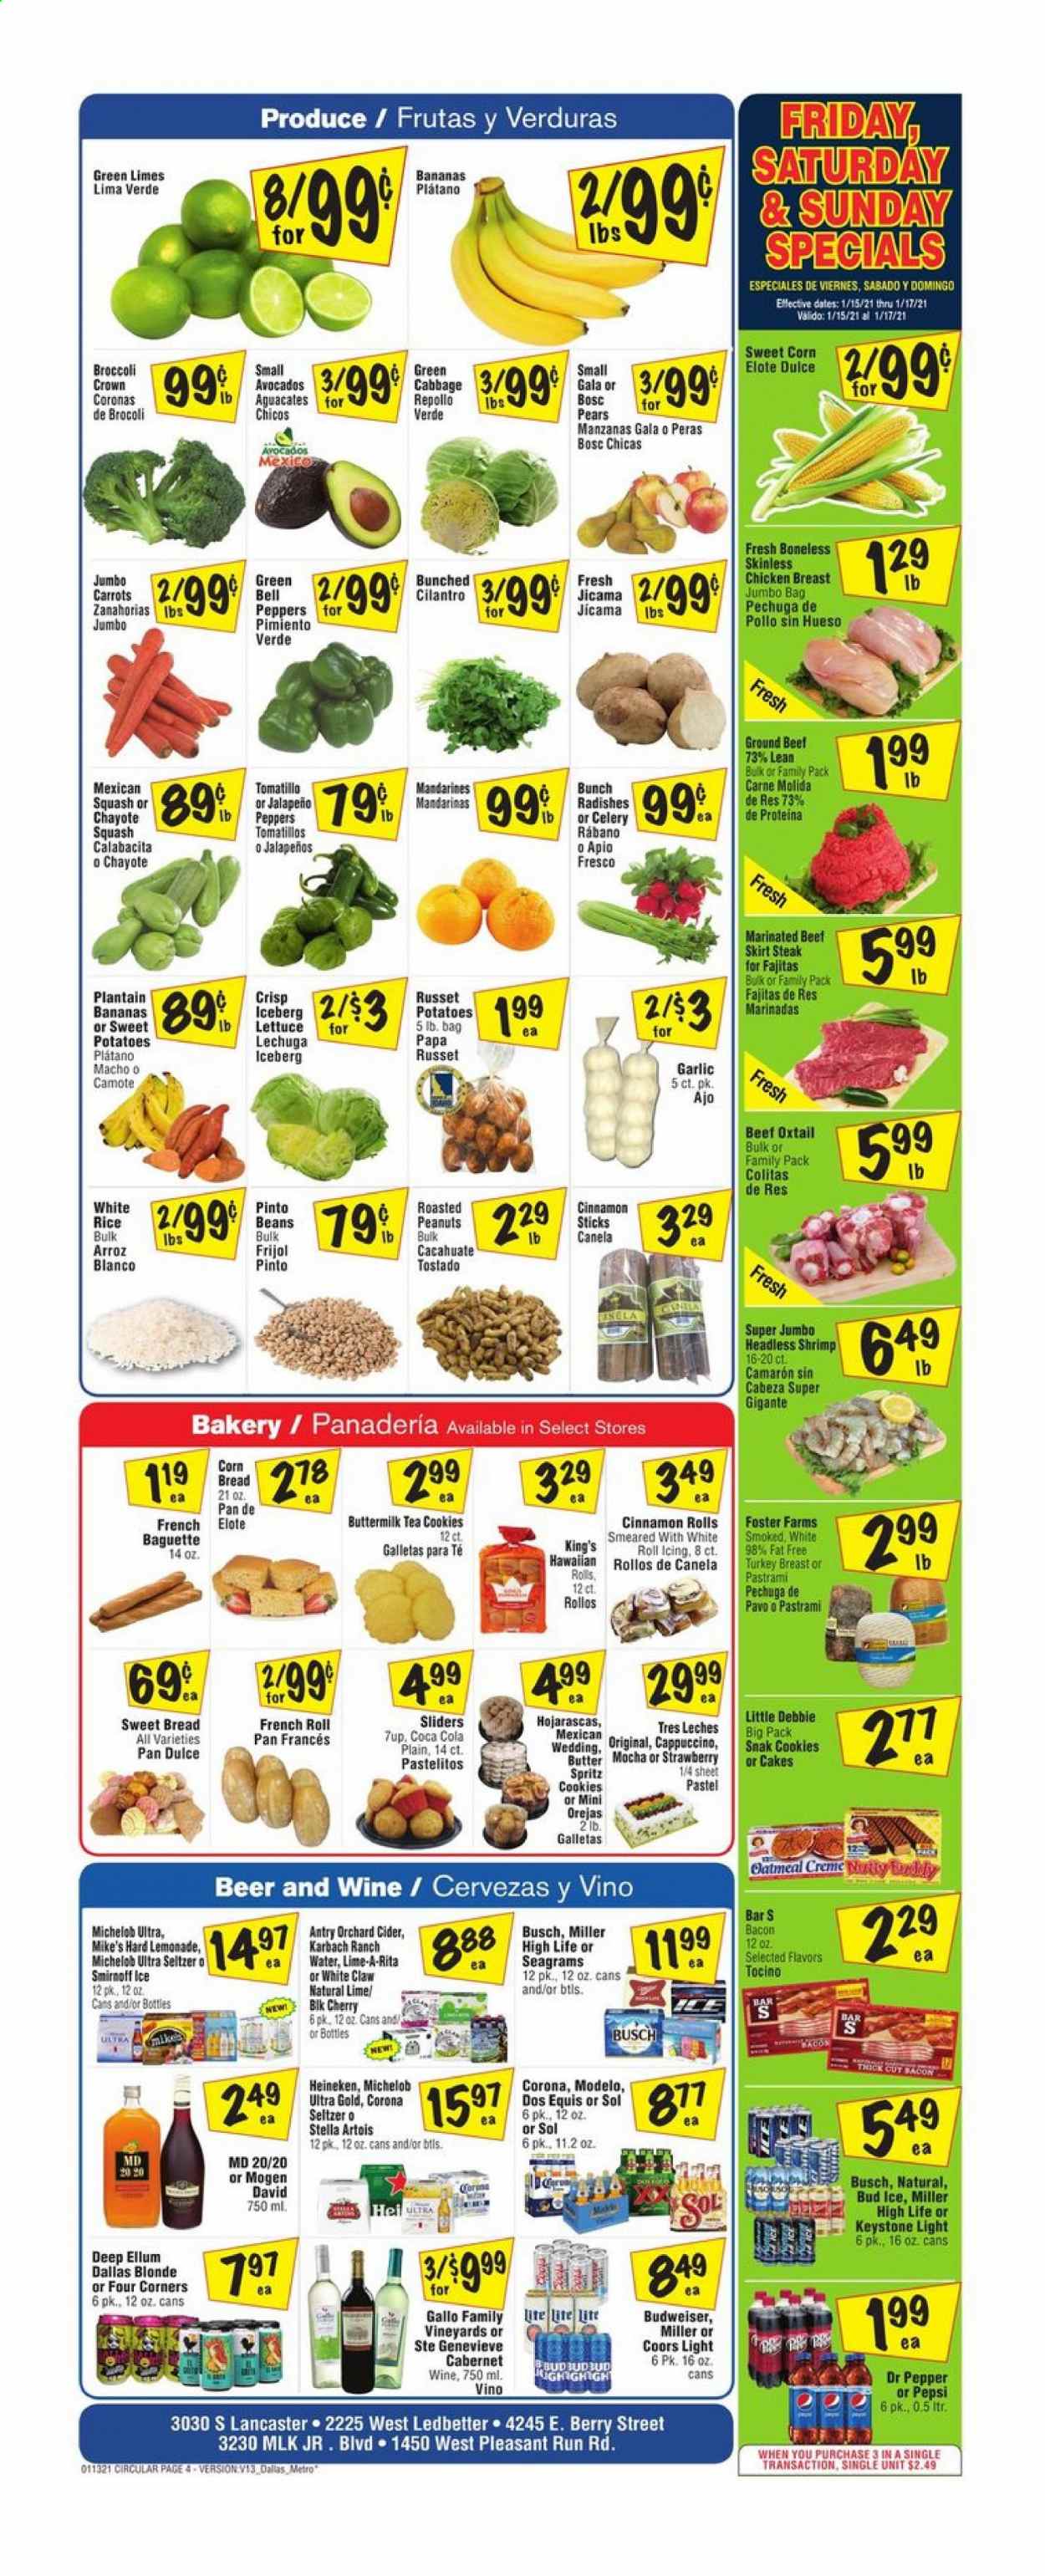 thumbnail - Fiesta Mart Flyer - 01/13/2021 - 01/19/2021 - Sales products - Budweiser, Stella Artois, Coors, Dos Equis, Michelob, bell peppers, celery, sweet potato, tomatillo, jicama, lettuce, baguette, bread, corn bread, cinnamon roll, cake, sweet bread, bananas, pears, chayote, shrimps, bacon, buttermilk, beans, carrots, sweet corn, cookies, oatmeal, garlic, mandarines, jalapeño, rice, pinto beans, white rice, cilantro, roasted peanuts, peanuts, dried dates, Coca-Cola, lemonade, Pepsi, Dr. Pepper, 7UP, seltzer water, tea, cappuccino, Cabernet Sauvignon, wine, Gallo Family, apple cider, Smirnoff, White Claw, beer, Busch, Corona Extra, Heineken, Miller, Sol, Keystone, Modelo, turkey breast, chicken breasts, beef meat, ground beef, pastrami, oxtail, steak, skirt, avocado, Gala, limes. Page 4.